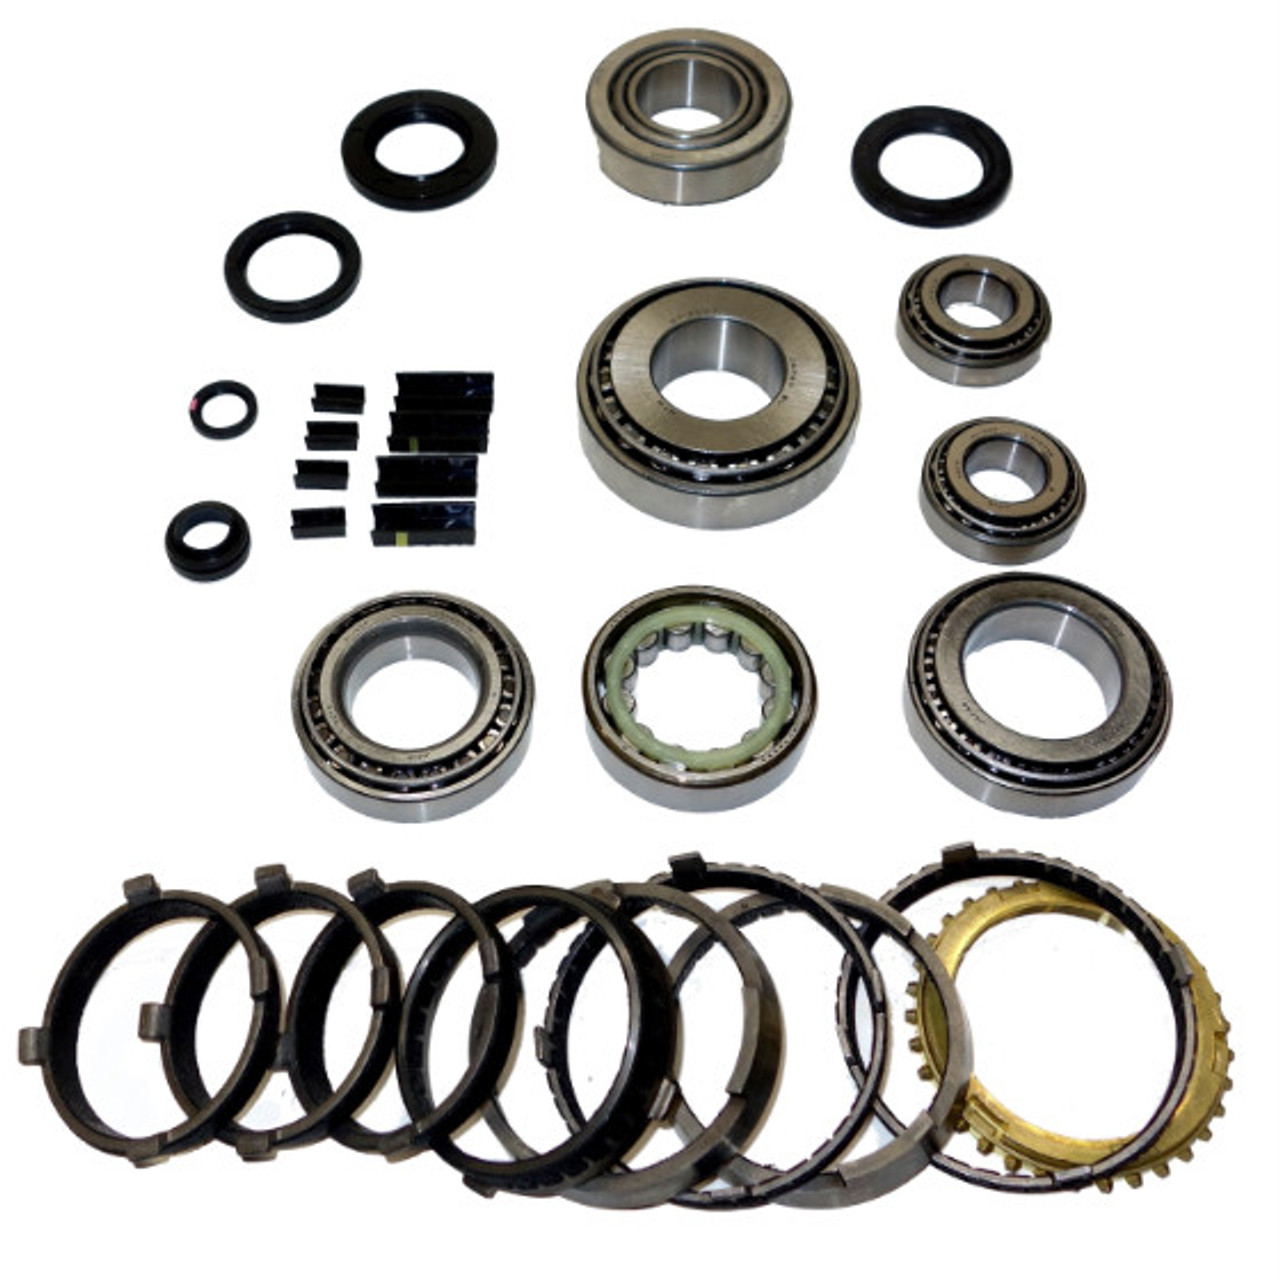 USA Standard Manual Transmission T56 Bearing Kit 1993 & Newer 6-Speed with Synchros